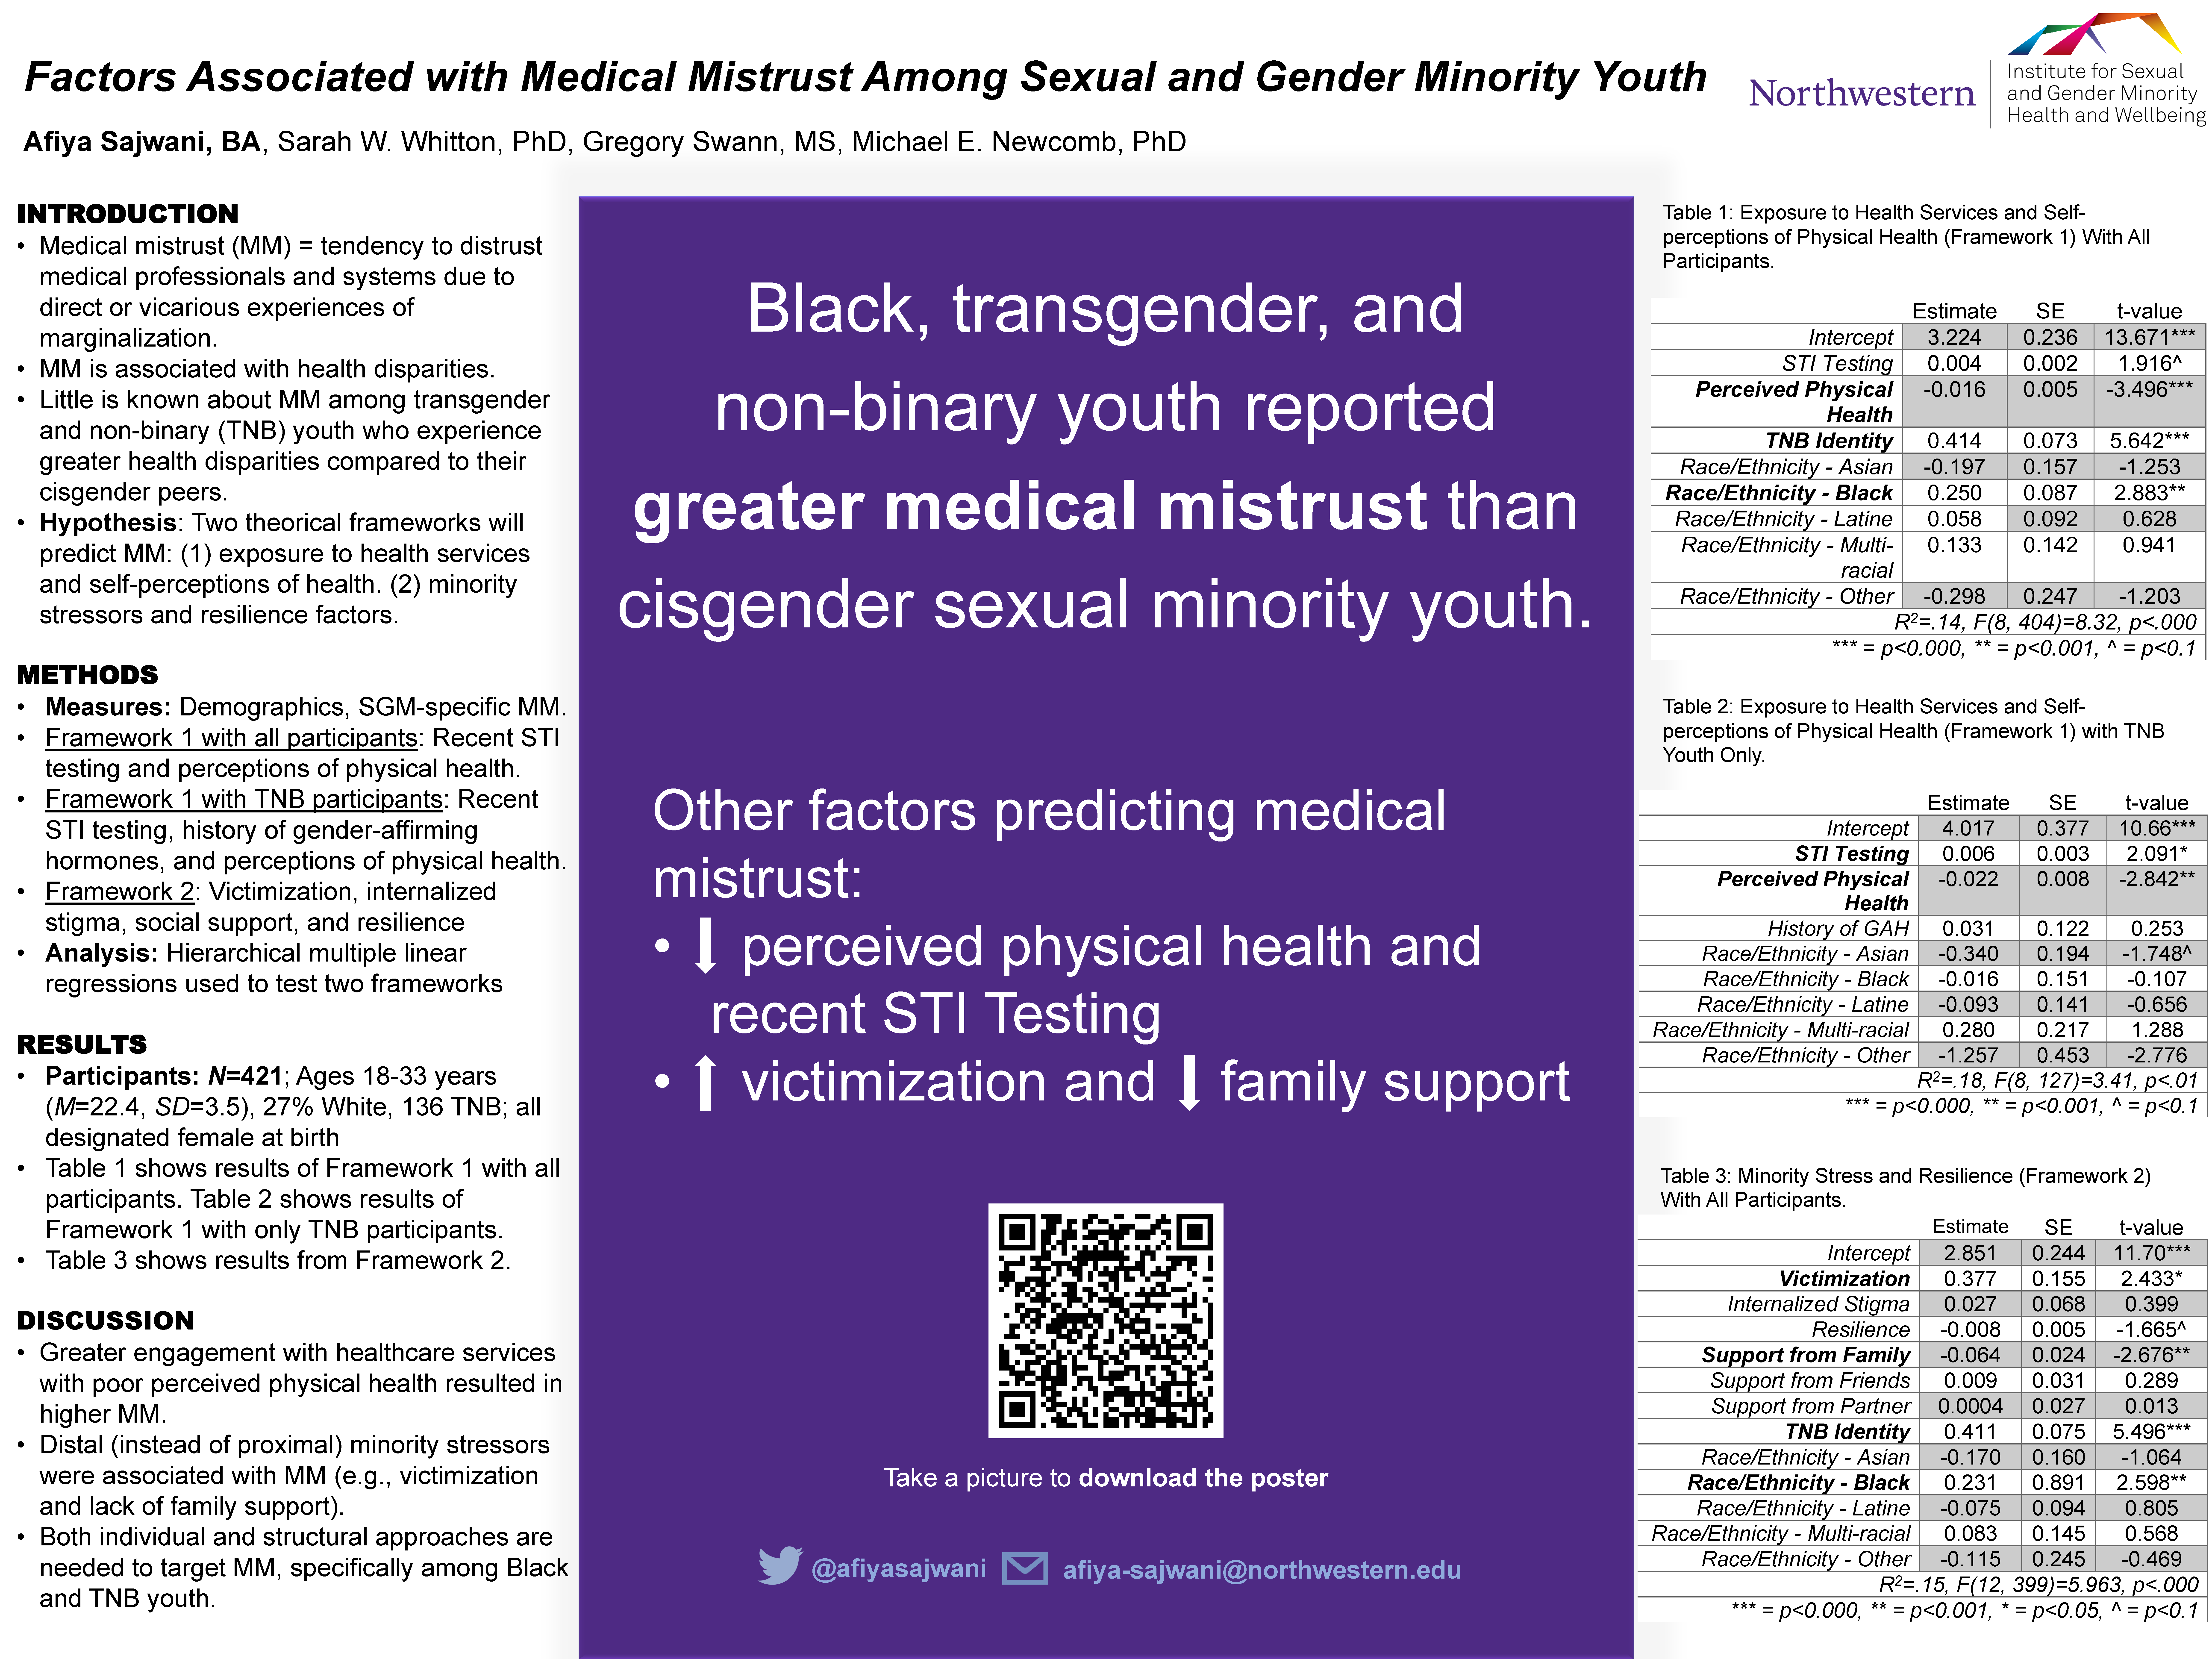 Factors Associated with Medical Mistrust Among Sexual and Gender Minority Youth (Northwestern University and ISGMH Logos) Afiya Sajwani, BA, Sarah W. Whitton, PhD, Gregory Swann, MS, Michael E. Newcomb, PhD  INTRODUCTION • Medical mistrust (MM) = tendency to distrust medical professionals and systems due to direct or vicarious experiences of marginalization.  • MM is associated with health disparities. • Little is known about MM among transgender and non-binary (TNB) youth who experience greater health disparities compared to their cisgender peers. • Hypothesis: Two theorical frameworks will predict MM: (1) exposure to health services and self-perceptions of health. (2) minority stressors and resilience factors.   METHODS • Measures: Demographics, SGM-specific MM.  • Framework 1 with all participants: Recent STI testing and perceptions of physical health. • Framework 1 with TNB participants: Recent STI testing, history of gender-affirming hormones, and perceptions of physical health. • Framework 2: Victimization, internalized stigma, social support, and resilience • Analysis: Hierarchical multiple linear regressions used to test two frameworks  RESULTS • Participants: N=421; Ages 18-33 years (M=22.4, SD=3.5), 27% White, 136 TNB; all designated female at birth • Table 1 shows results of Framework 1 with all participants. Table 2 shows results of Framework 1 with only TNB participants.  • Table 3 shows results from Framework 2.  DISCUSSION • Greater engagement with healthcare services with poor perceived physical health resulted in higher MM. • Distal (instead of proximal) minority stressors were associated with MM (e.g., victimization and lack of family support).  • Both individual and structural approaches are needed to target MM, specifically among Black and TNB youth.  Black, transgender, and non-binary youth reported greater medical mistrust than cisgender sexual minority youth. Other factors predicting medical mistrust: • (down arrow) perceived physical health and recent STI Testing • (up arrow) victimization and (down arrow) family support    (QR code) Take a picture to download the poster (image of the Twitter bird) @afiyasajwani  (image of an envelope) afiya-sajwani@northwestern.edu  Table 1: Exposure to Health Services and Self-perceptions of Physical Health (Framework 1) With All Participants.   Estimate SE t-value Intercept 3.224 0.236 13.671*** STI Testing 0.004 0.002 1.916^ Perceived Physical Health -0.016 0.005 -3.496*** TNB Identity 0.414 0.073 5.642*** Race/Ethnicity - Asian -0.197 0.157 -1.253 Race/Ethnicity - Black 0.250 0.087 2.883** Race/Ethnicity - Latine 0.058 0.092 0.628 Race/Ethnicity - Multi-racial 0.133 0.142 0.941 Race/Ethnicity - Other -0.298 0.247 -1.203 R2=.14, F(8, 404)=8.32, p<.000 *** = p<0.000, ** = p<0.001, ^ = p<0.1         Table 2: Exposure to Health Services and Self-perceptions of Physical Health (Framework 1) with TNB Youth Only.   Estimate SE t-value Intercept 4.017 0.377 10.66*** STI Testing 0.006 0.003 2.091* Perceived Physical Health -0.022 0.008 -2.842** History of GAH 0.031 0.122 0.253 Race/Ethnicity - Asian -0.340 0.194 -1.748^ Race/Ethnicity - Black -0.016 0.151 -0.107 Race/Ethnicity - Latine -0.093 0.141 -0.656 Race/Ethnicity - Multi-racial 0.280 0.217 1.288 Race/Ethnicity - Other -1.257 0.453 -2.776 R2=.18, F(8, 127)=3.41, p<.01 *** = p<0.000, ** = p<0.001, ^ = p<0.1          Table 3: Minority Stress and Resilience (Framework 2) With All Participants.  Estimate SE t-value Intercept 2.851 0.244 11.70*** Victimization 0.377 0.155 2.433* Internalized Stigma 0.027 0.068 0.399 Resilience -0.008 0.005 -1.665^ Support from Family -0.064 0.024 -2.676** Support from Friends 0.009 0.031 0.289 Support from Partner 0.0004 0.027 0.013 TNB Identity 0.411 0.075 5.496*** Race/Ethnicity - Asian -0.170 0.160 -1.064 Race/Ethnicity - Black 0.231 0.891 2.598** Race/Ethnicity - Latine -0.075 0.094 0.805 Race/Ethnicity - Multi-racial 0.083 0.145 0.568 Race/Ethnicity - Other -0.115 0.245 -0.469 R2=.15, F(12, 399)=5.963, p<.000 *** = p<0.000, ** = p<0.001, * = p<0.05, ^ = p<0.1